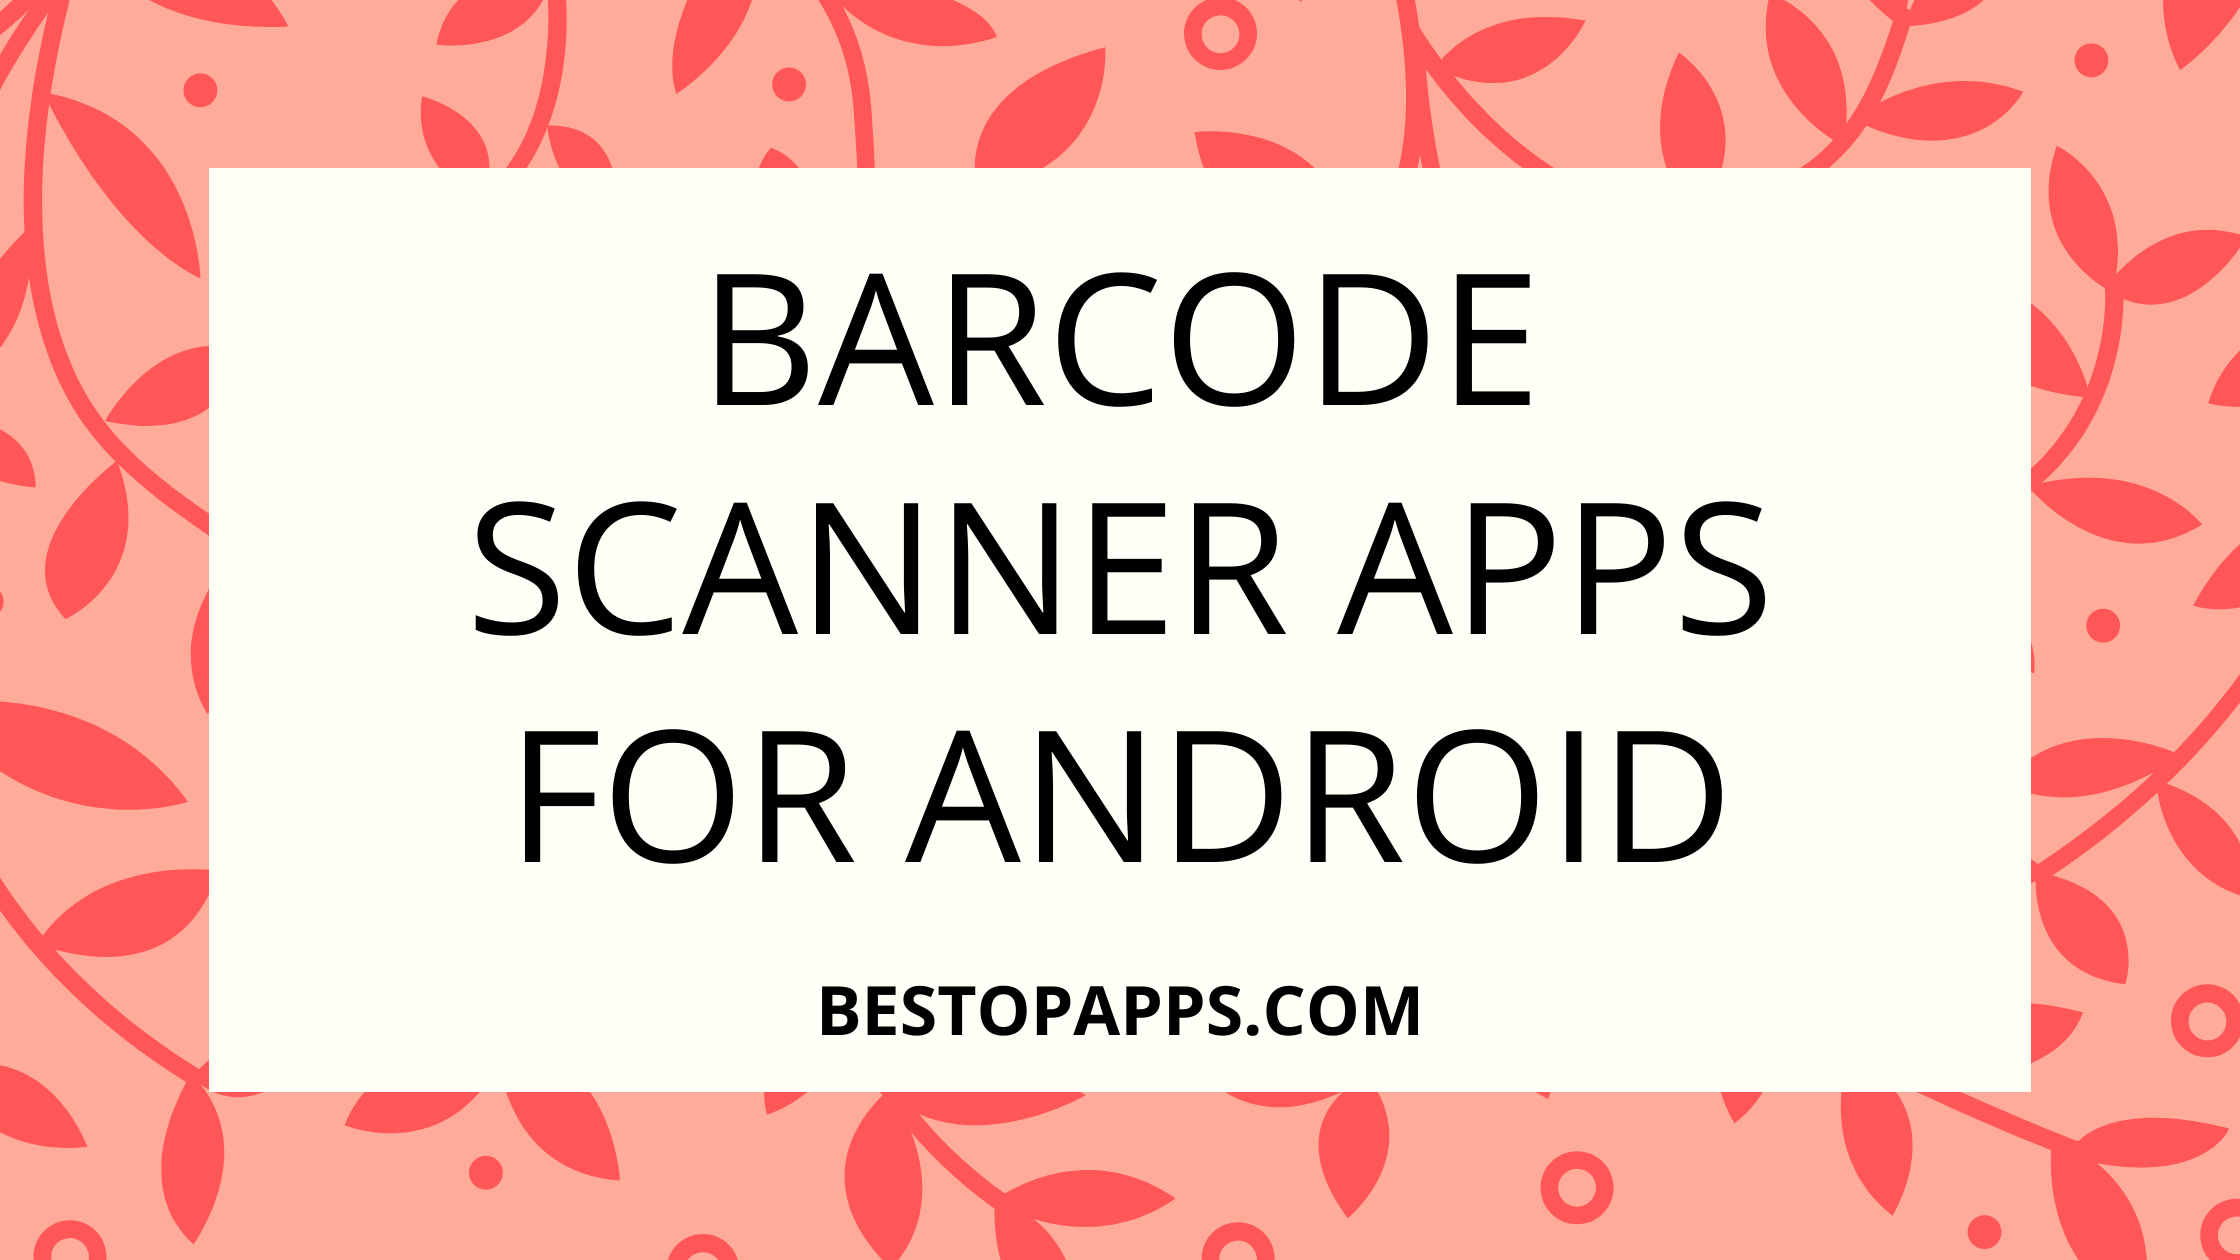 BARCODE SCANNER APPS FOR ANDROID